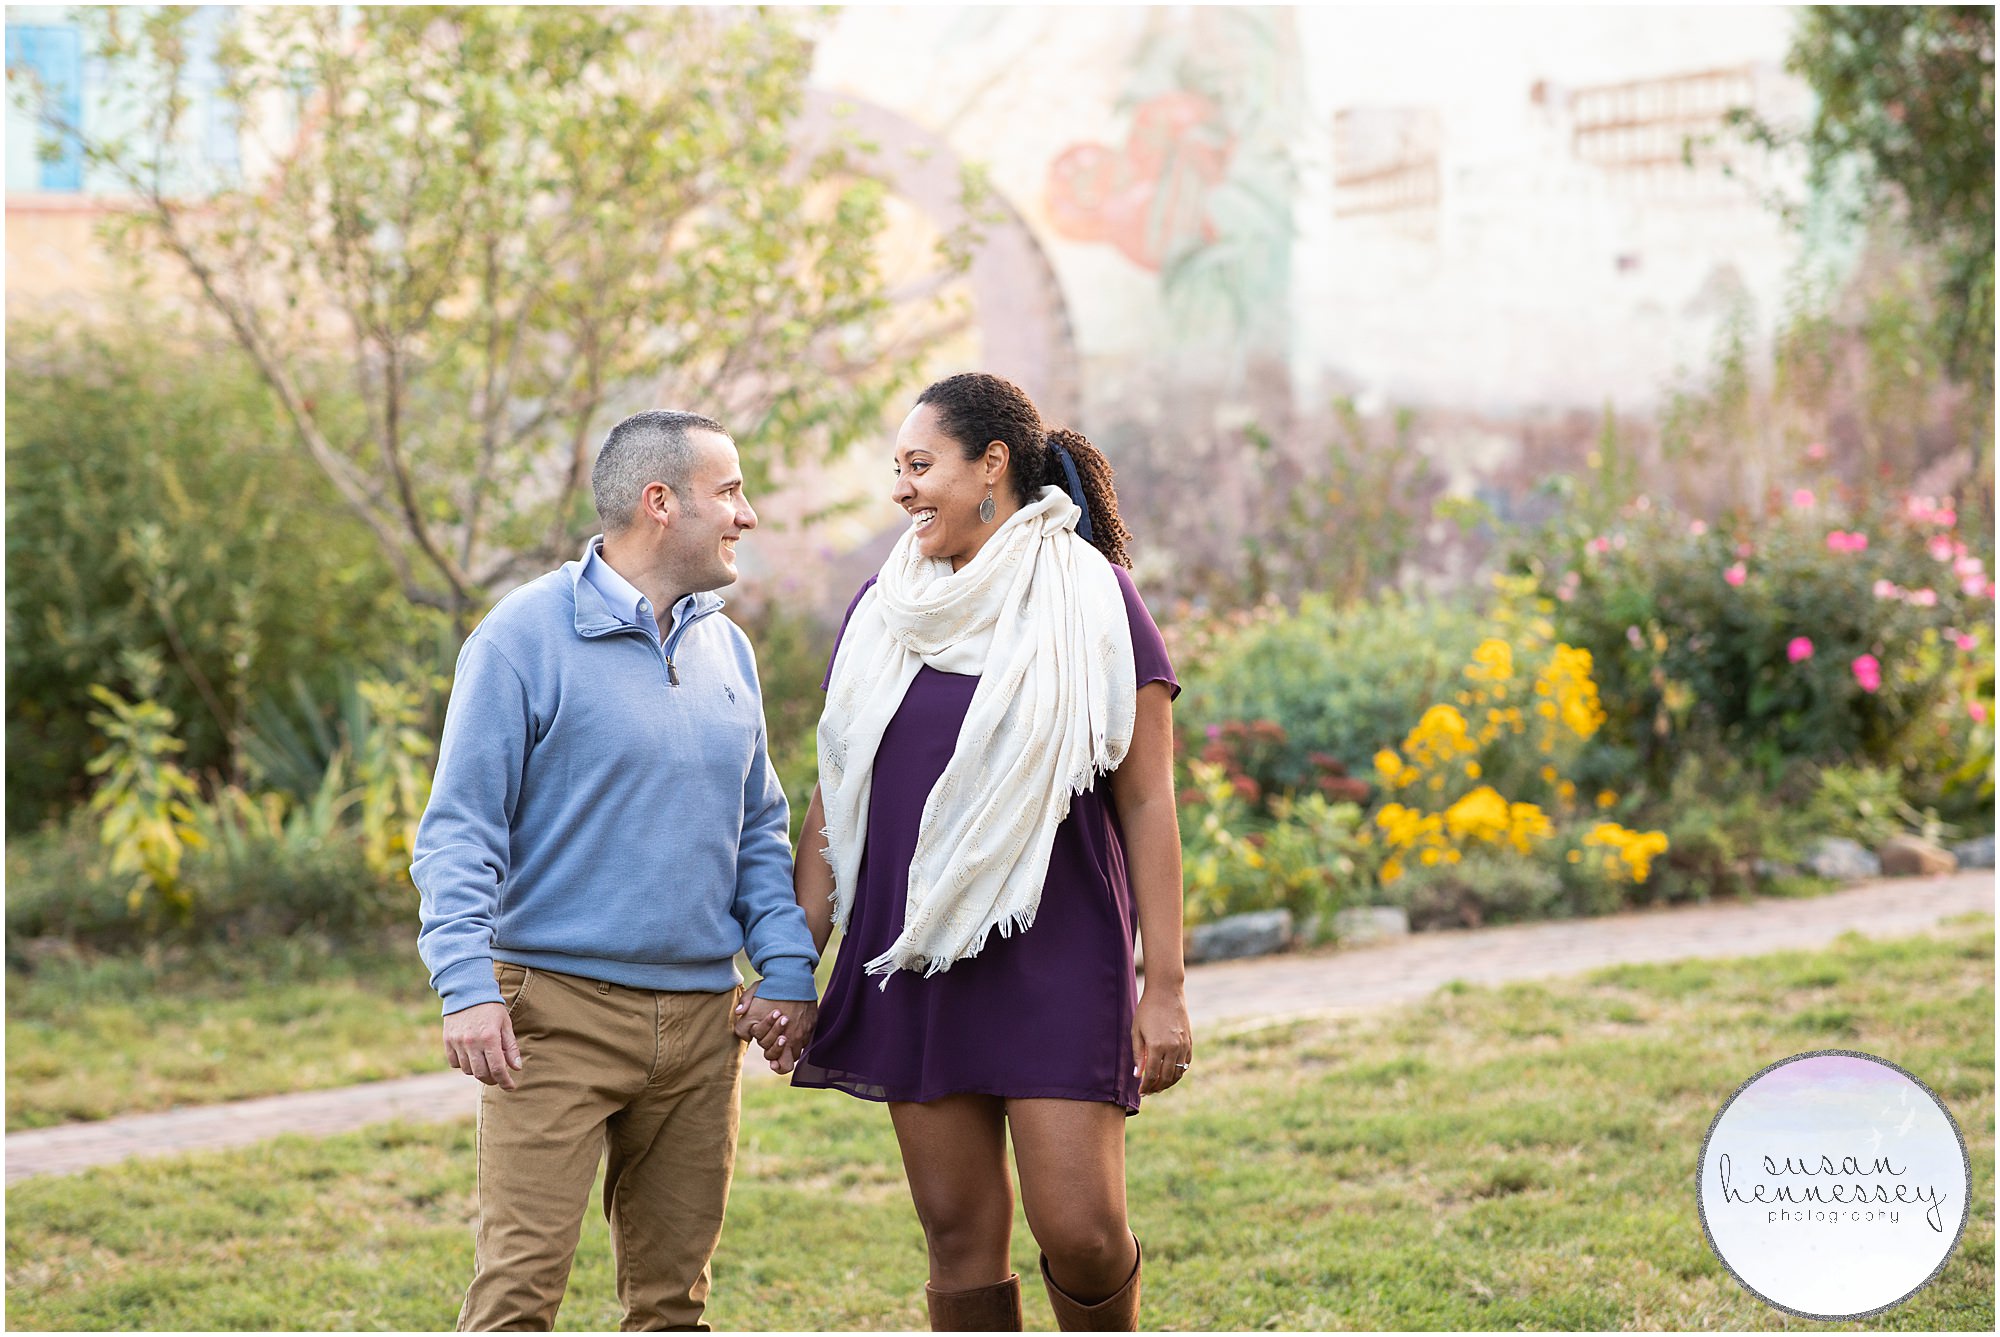 A Northern Liberties Engagement Session by Philly photographer, Susan Hennessey